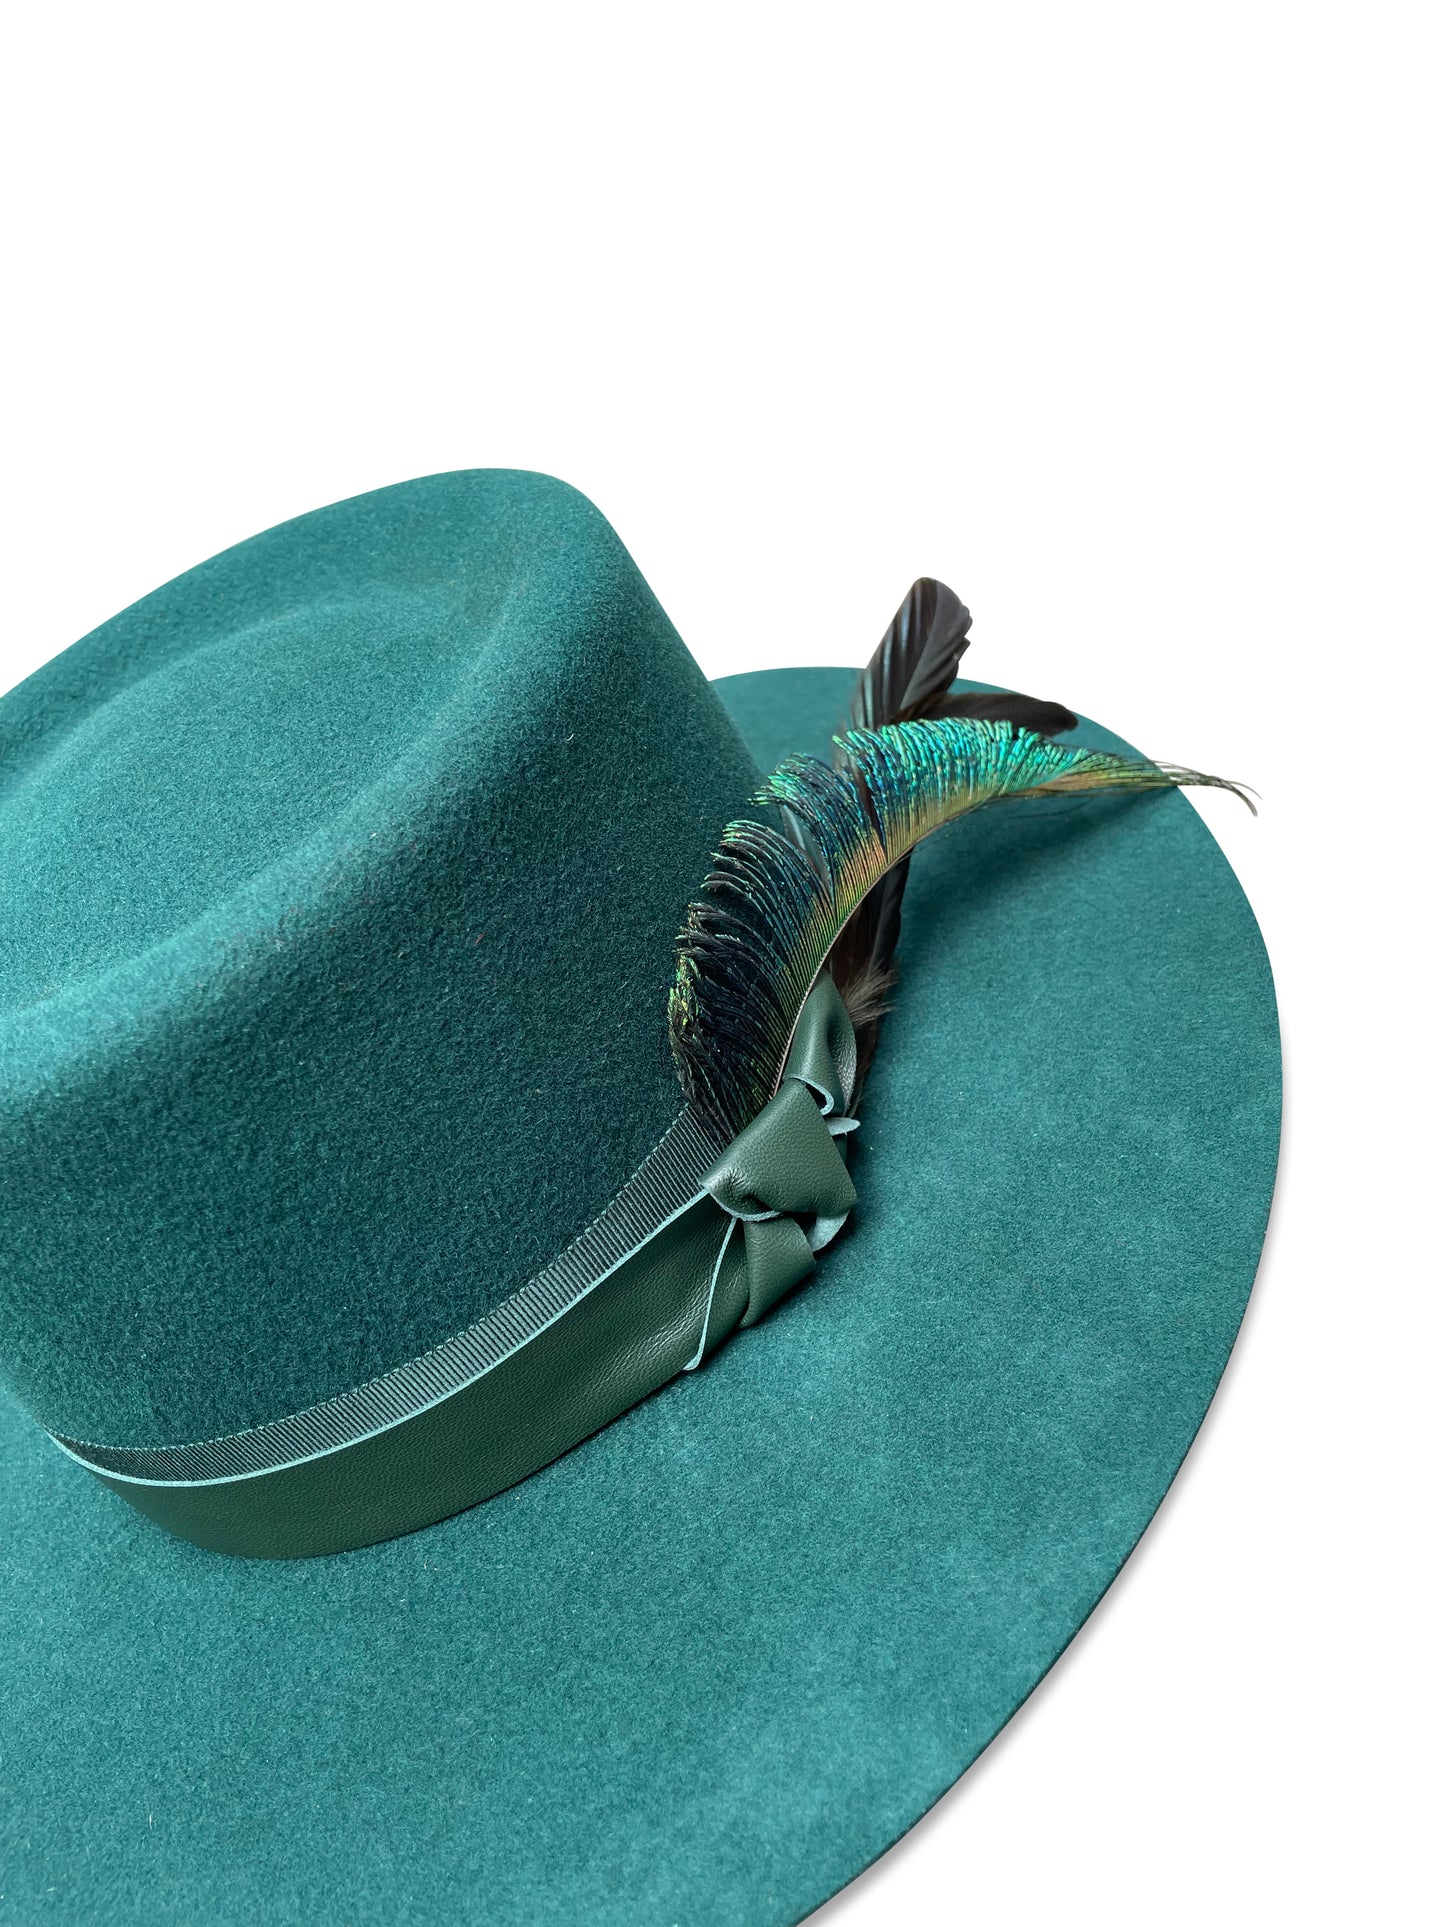 Green gambler-style wool felt hat with grosgrain and lambskin trim, featuring a peacock sword feather, from Cha Cha's House of Ill Repute